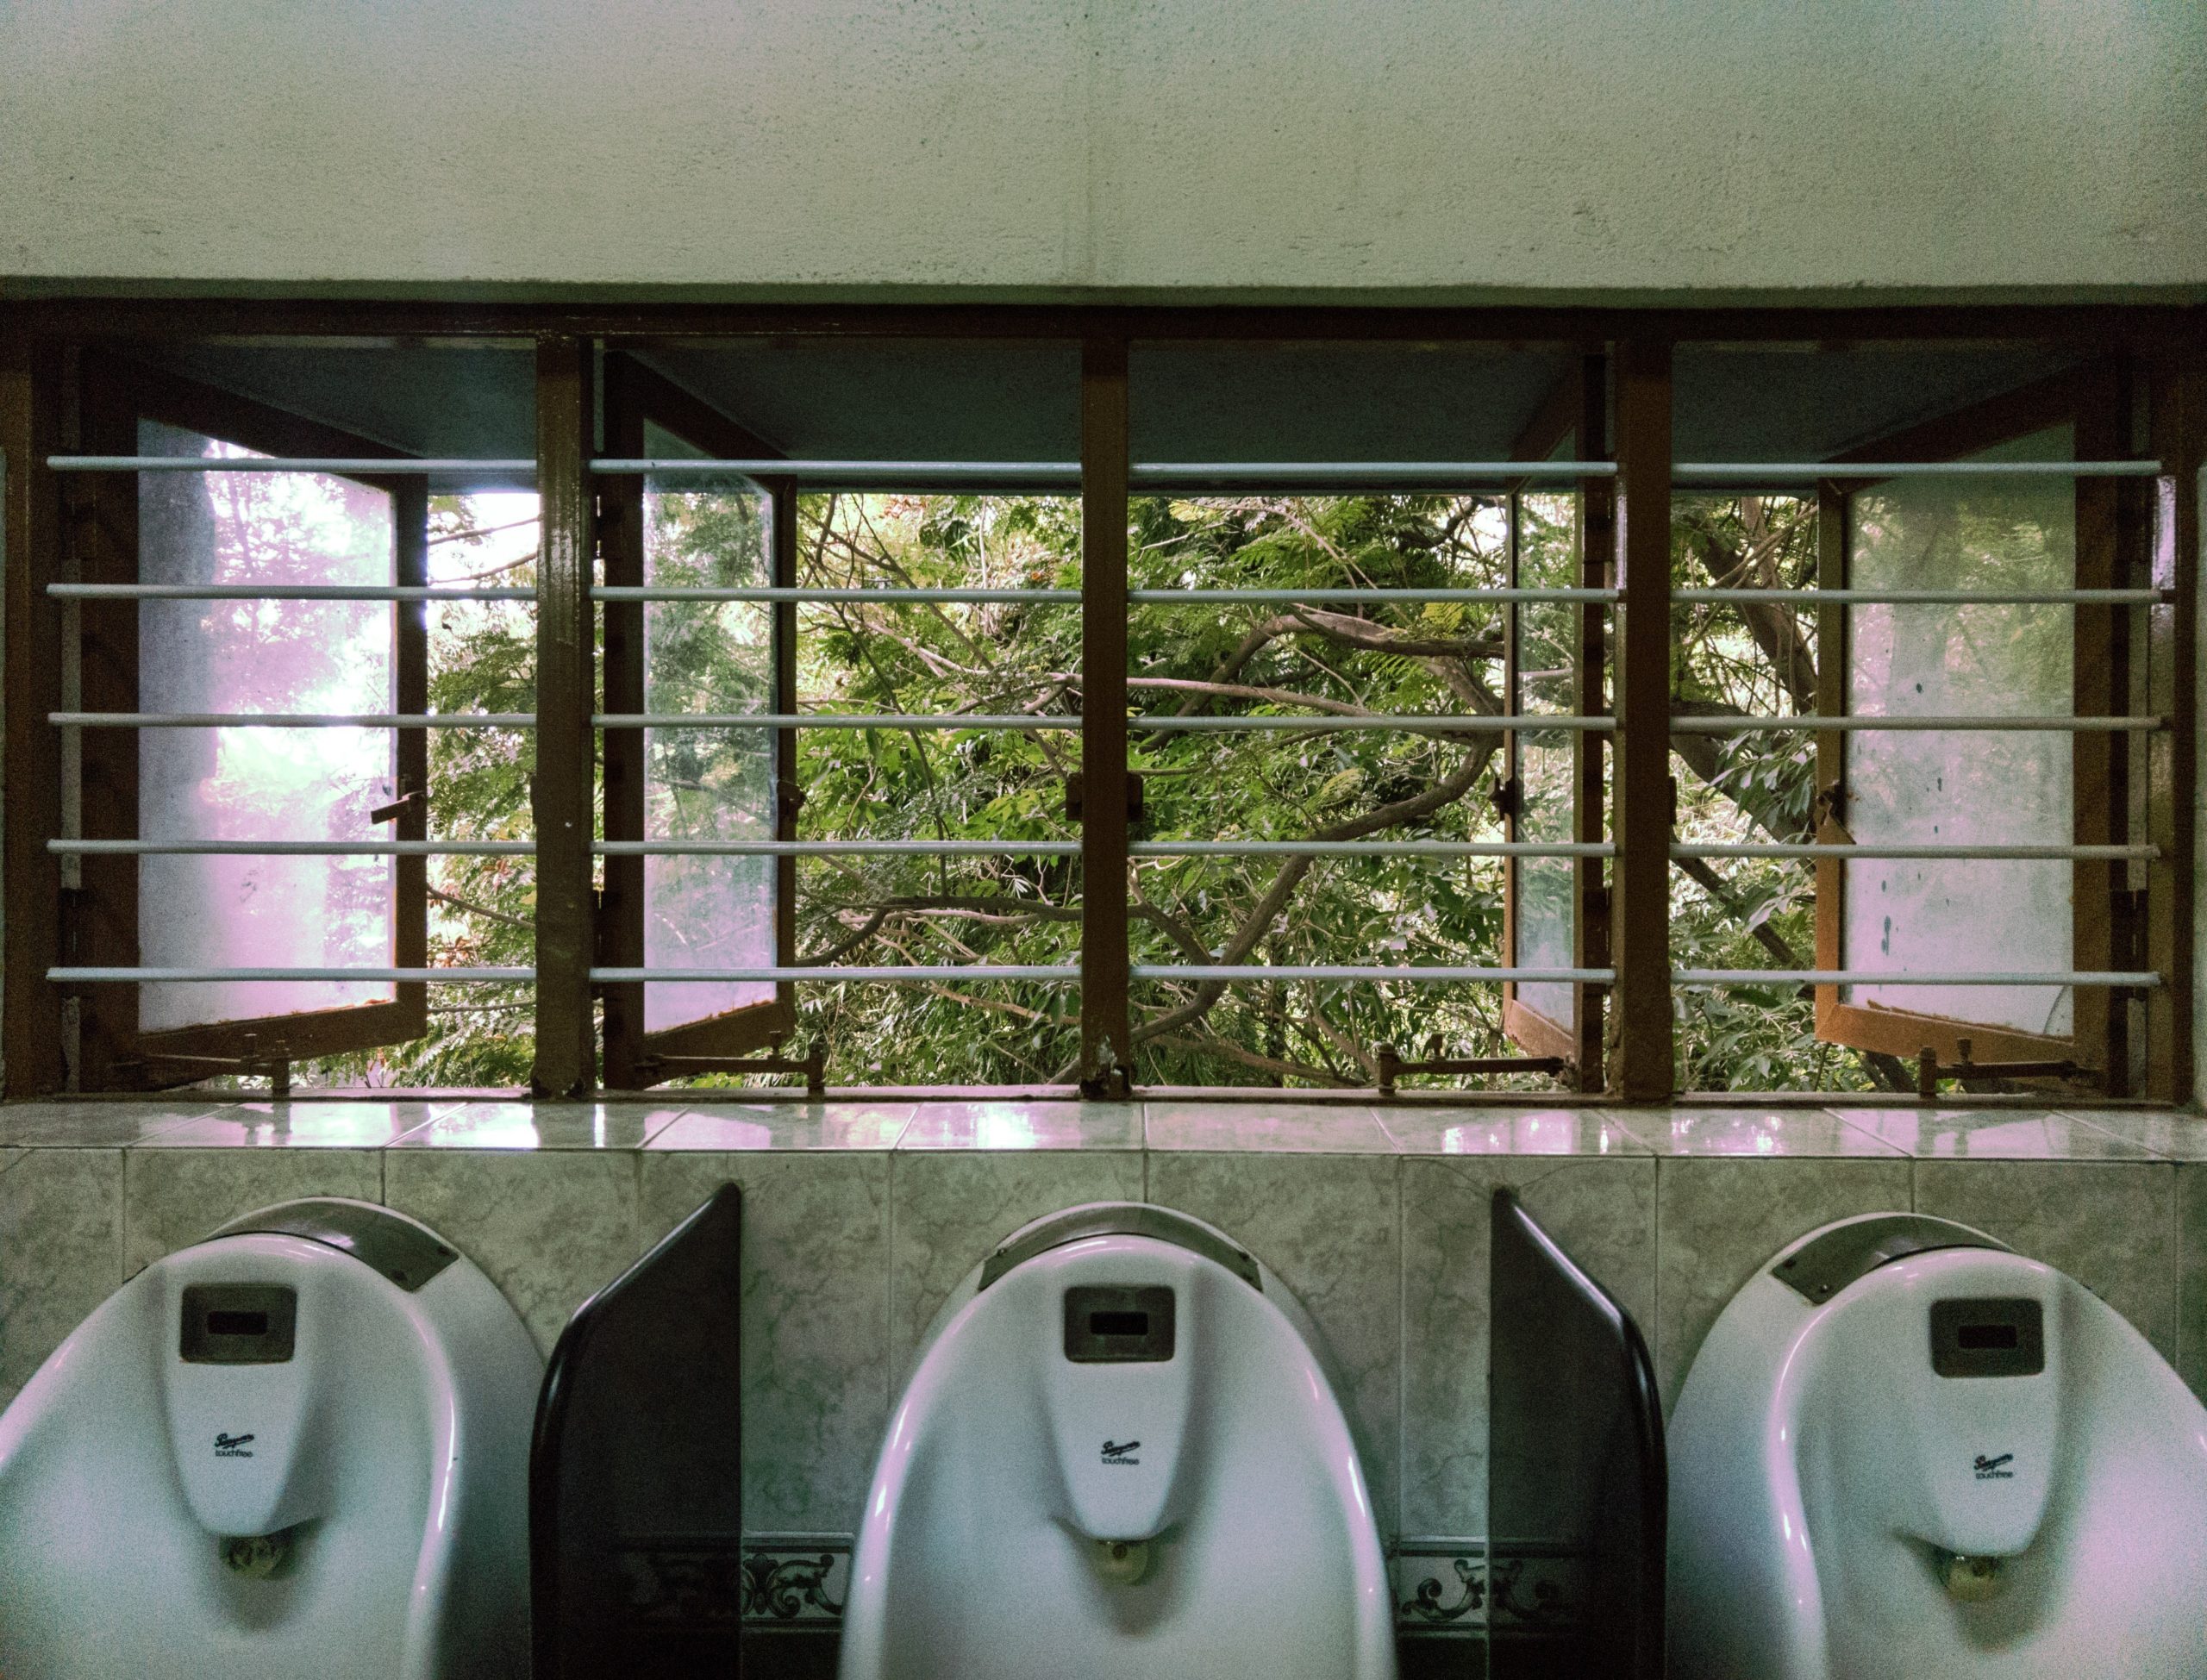 clean-urinals-beneath-beatiful-window-for-a-better-cleaning-solution